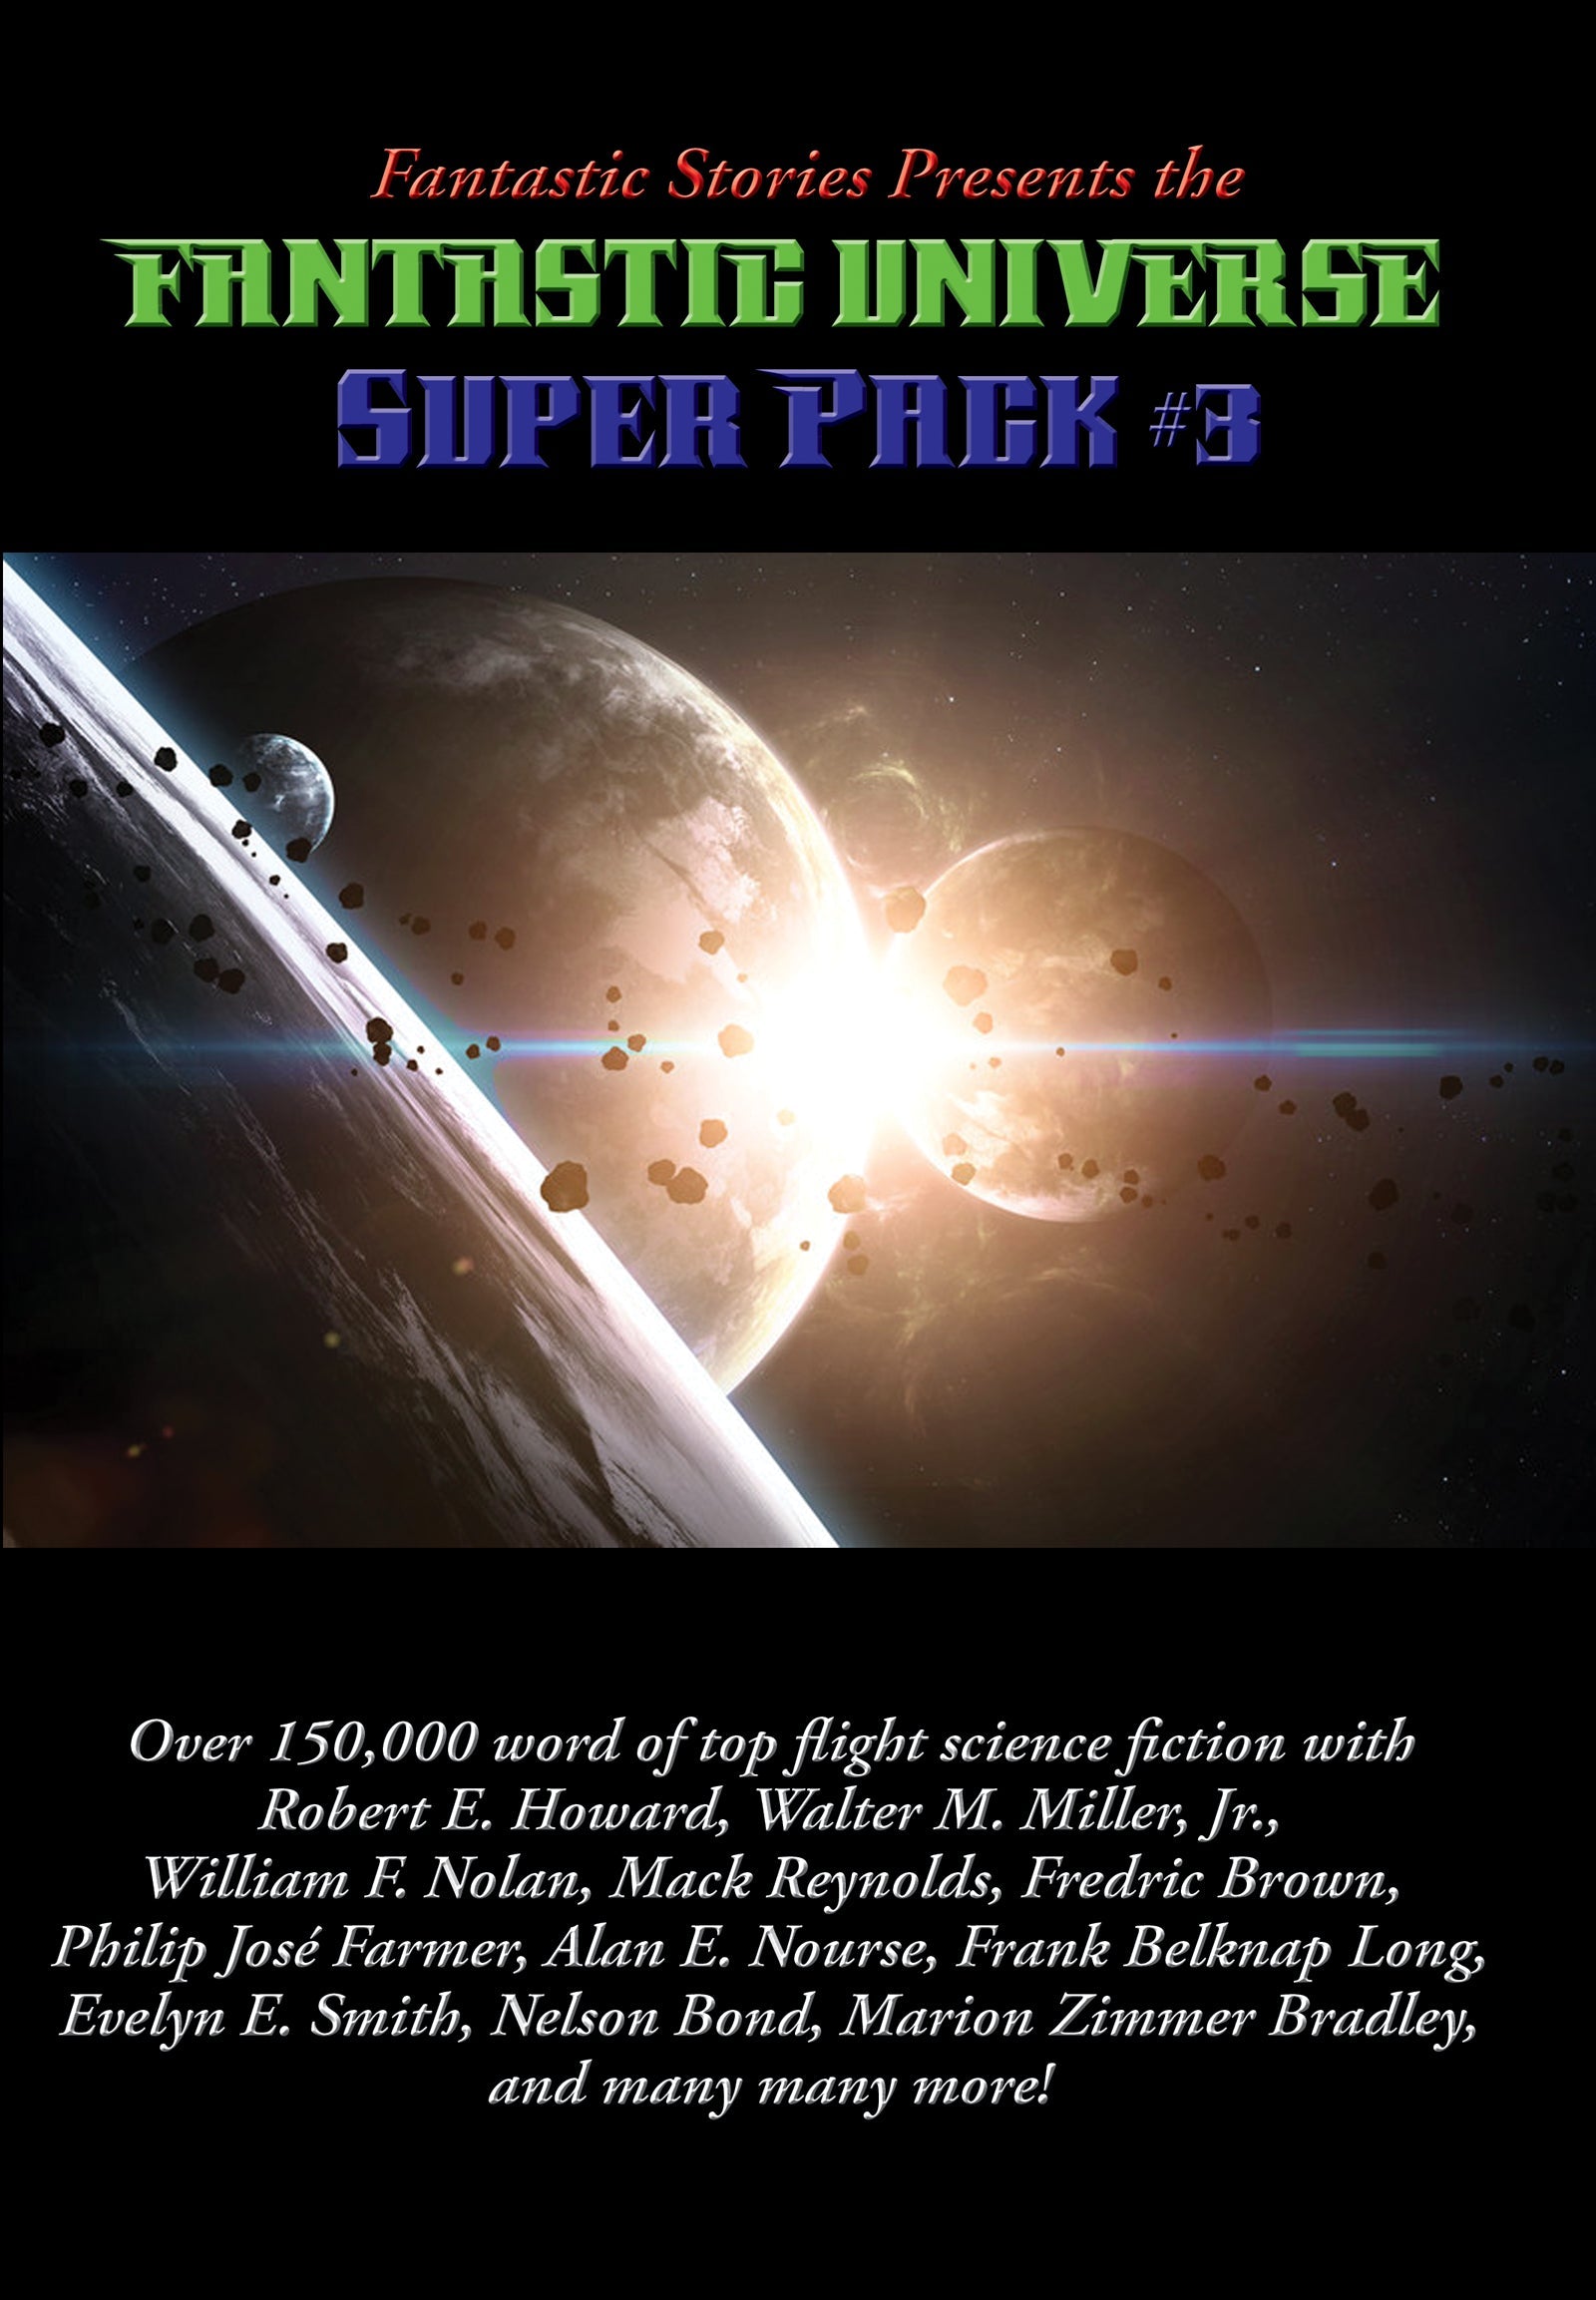 Cover art for Positronic Super Pack #26, the third Fantastic Universe Super Pack.